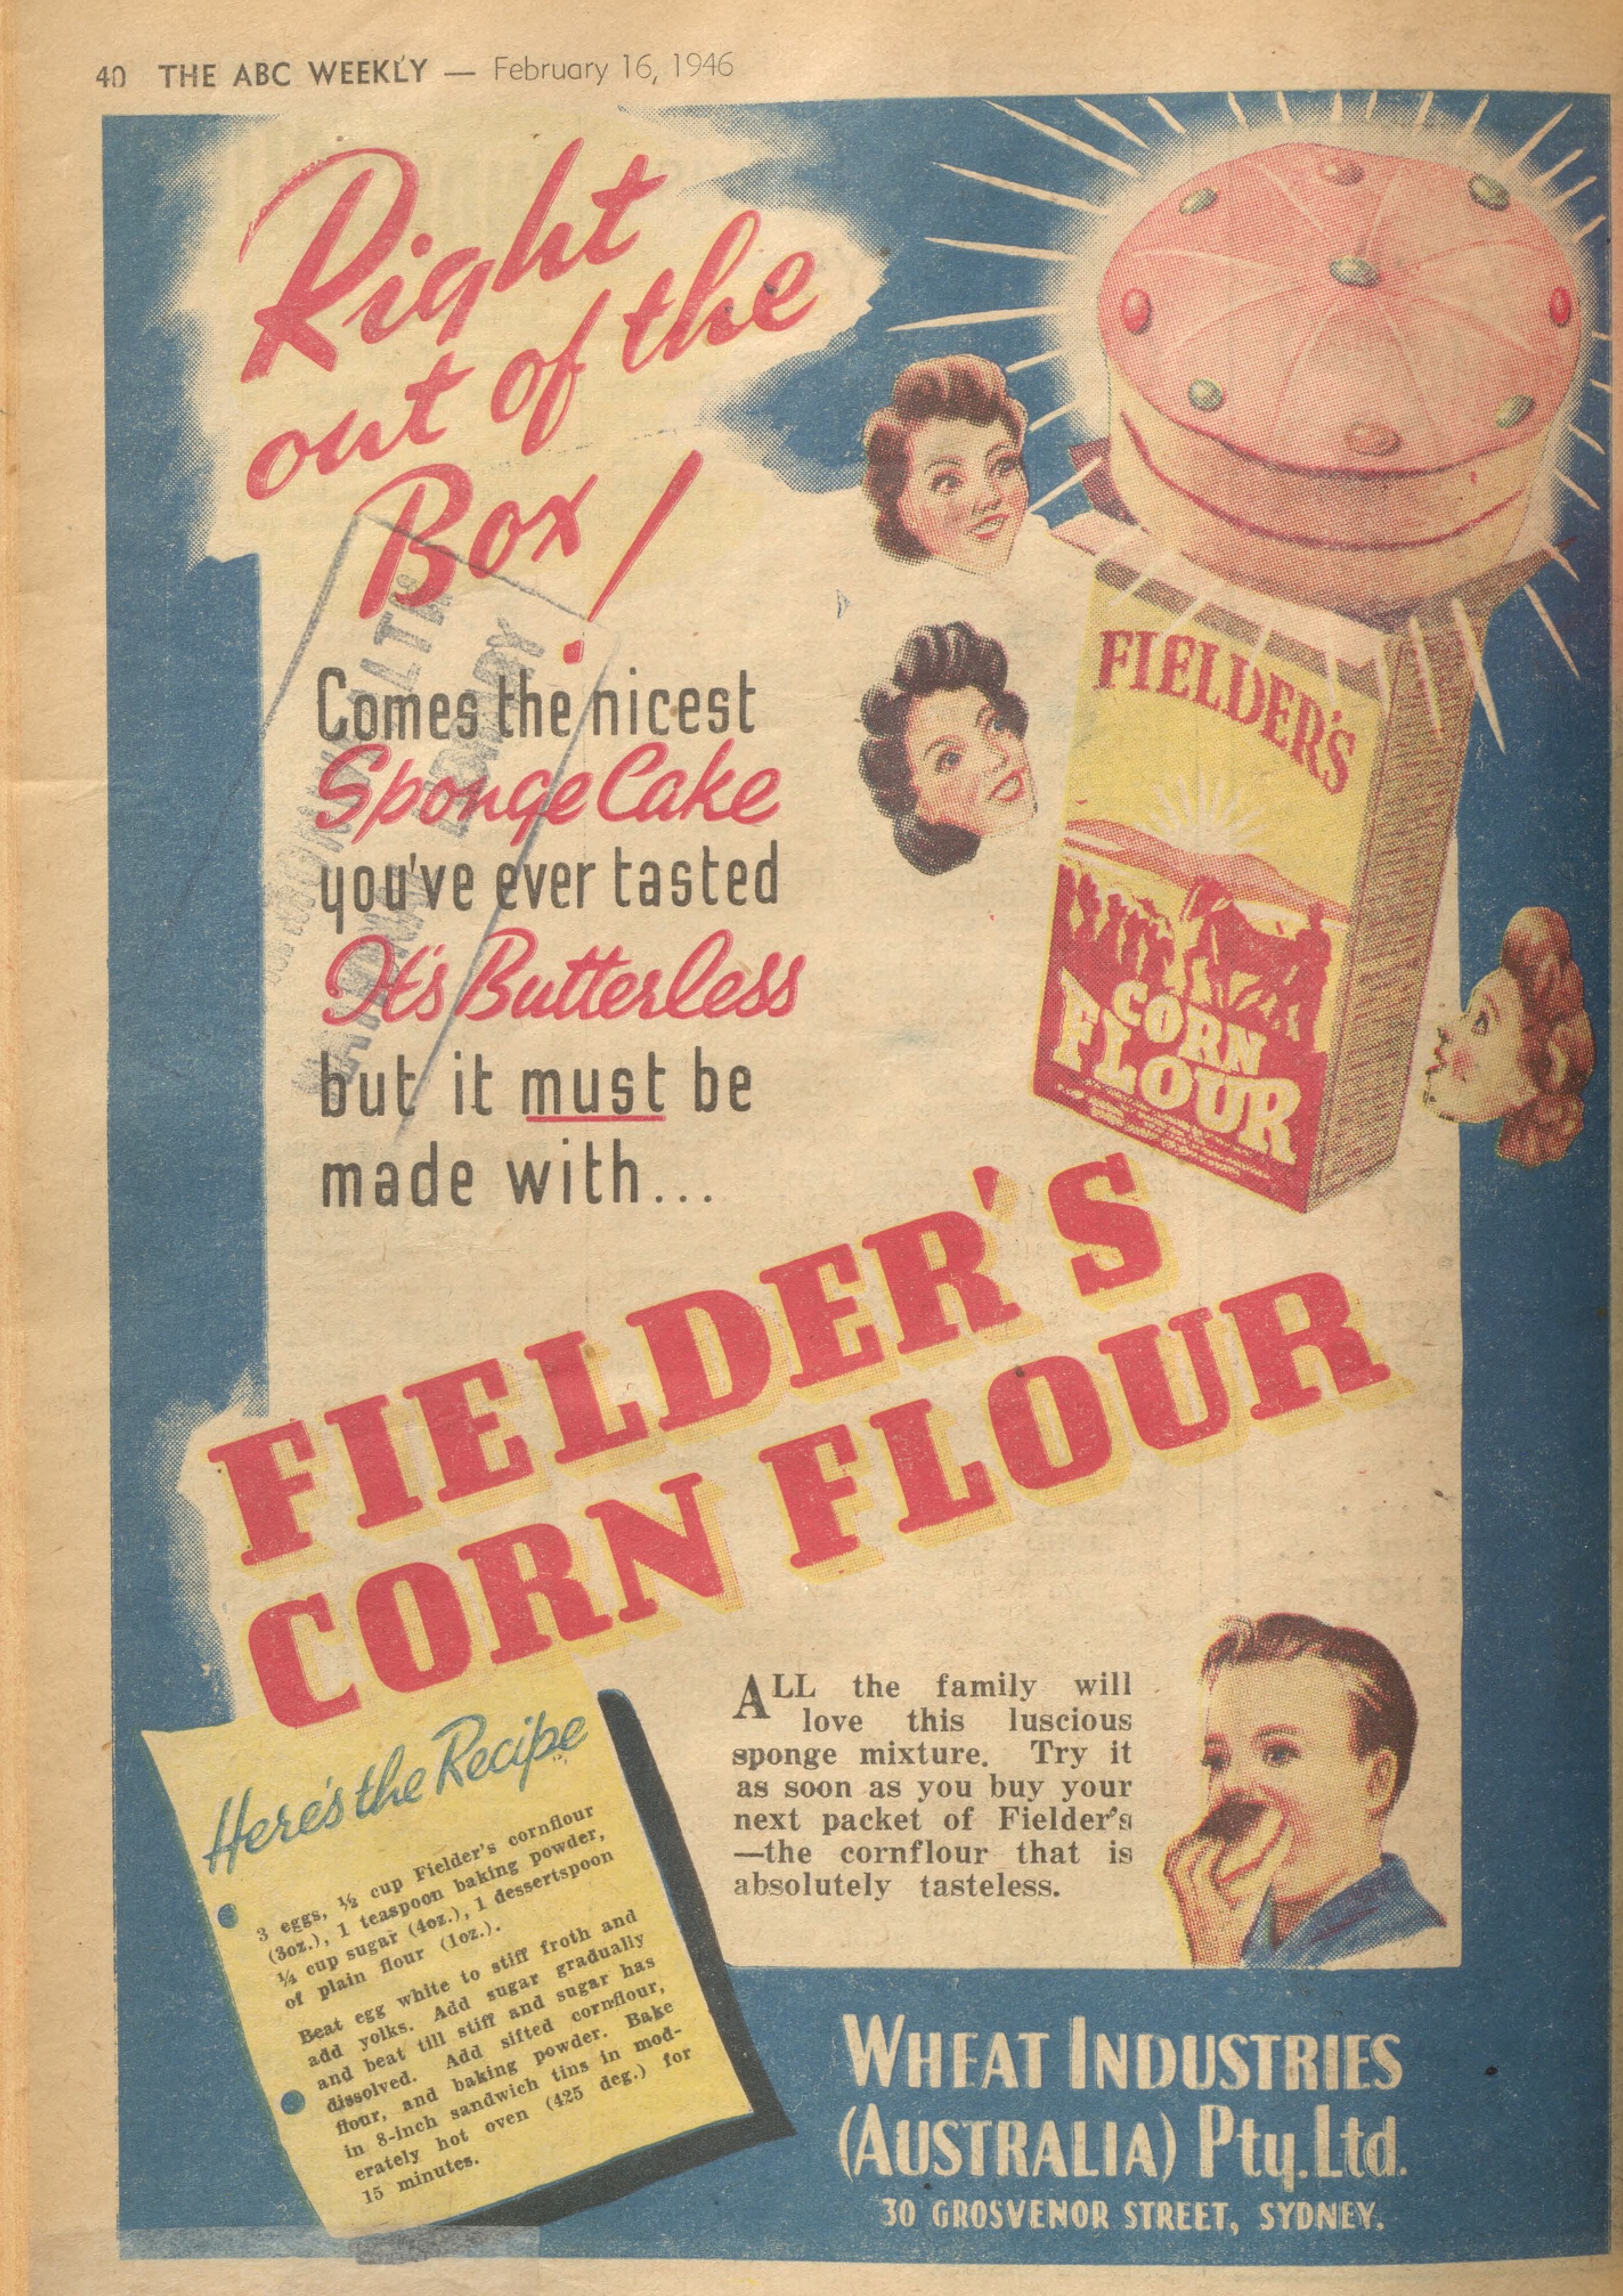 An ad for Fielder's cornflour with a recipe for a sponge cake. 